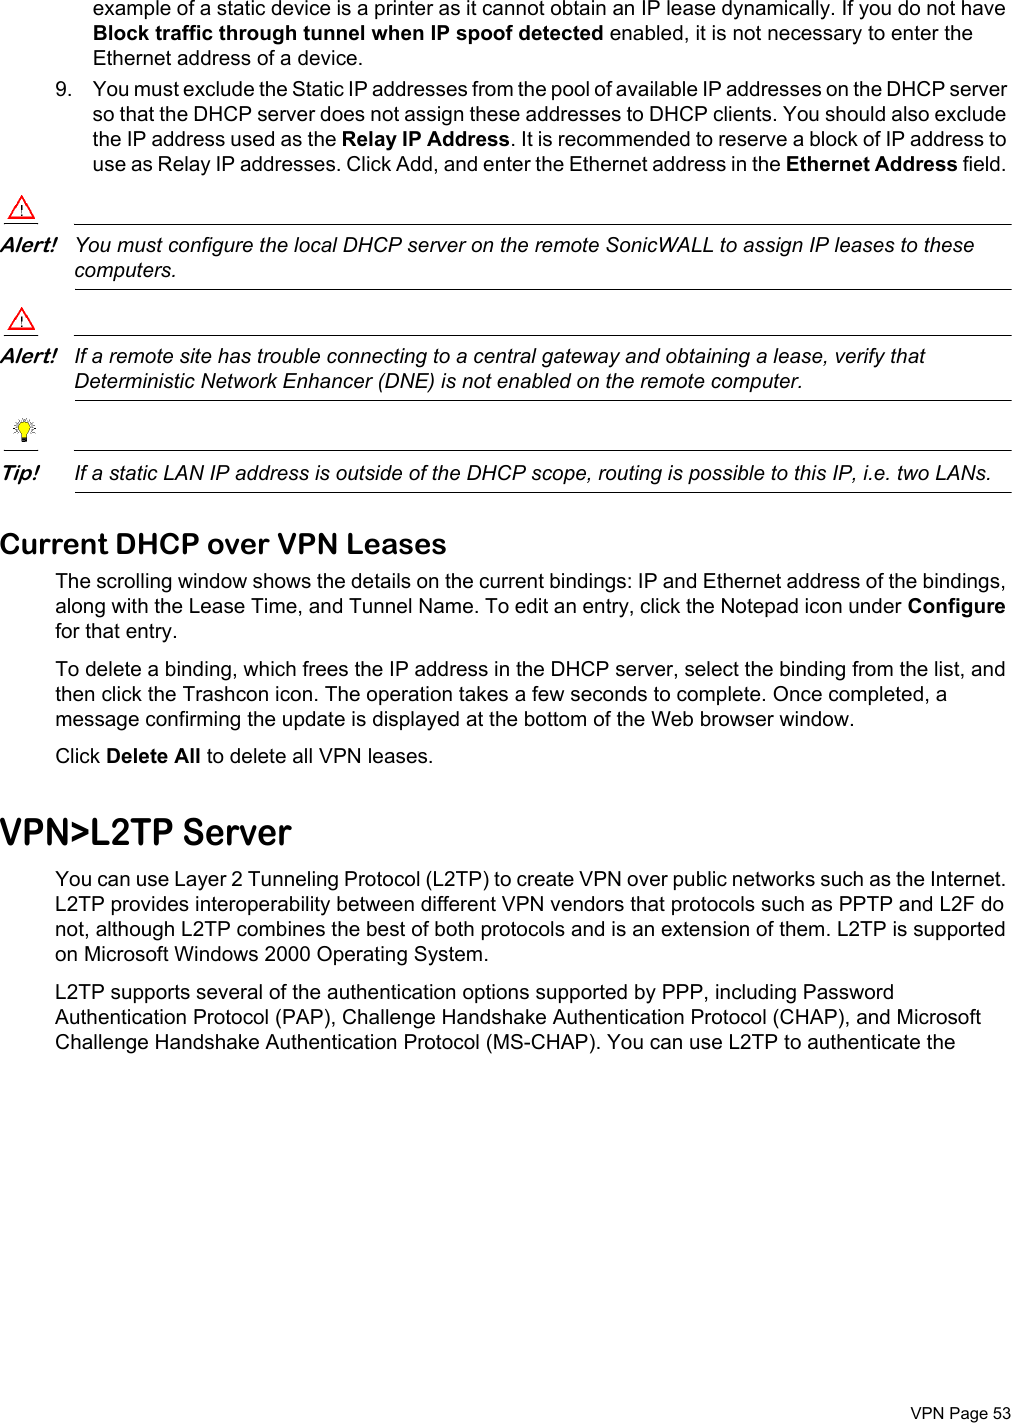  VPN Page 53example of a static device is a printer as it cannot obtain an IP lease dynamically. If you do not have Block traffic through tunnel when IP spoof detected enabled, it is not necessary to enter the Ethernet address of a device. 9. You must exclude the Static IP addresses from the pool of available IP addresses on the DHCP server so that the DHCP server does not assign these addresses to DHCP clients. You should also exclude the IP address used as the Relay IP Address. It is recommended to reserve a block of IP address to use as Relay IP addresses. Click Add, and enter the Ethernet address in the Ethernet Address field. Alert!You must configure the local DHCP server on the remote SonicWALL to assign IP leases to these computers. Alert!If a remote site has trouble connecting to a central gateway and obtaining a lease, verify that Deterministic Network Enhancer (DNE) is not enabled on the remote computer. Tip!If a static LAN IP address is outside of the DHCP scope, routing is possible to this IP, i.e. two LANs.Current DHCP over VPN LeasesThe scrolling window shows the details on the current bindings: IP and Ethernet address of the bindings, along with the Lease Time, and Tunnel Name. To edit an entry, click the Notepad icon under Configure for that entry. To delete a binding, which frees the IP address in the DHCP server, select the binding from the list, and then click the Trashcon icon. The operation takes a few seconds to complete. Once completed, a message confirming the update is displayed at the bottom of the Web browser window.Click Delete All to delete all VPN leases. VPN&gt;L2TP ServerYou can use Layer 2 Tunneling Protocol (L2TP) to create VPN over public networks such as the Internet. L2TP provides interoperability between different VPN vendors that protocols such as PPTP and L2F do not, although L2TP combines the best of both protocols and is an extension of them. L2TP is supported on Microsoft Windows 2000 Operating System. L2TP supports several of the authentication options supported by PPP, including Password Authentication Protocol (PAP), Challenge Handshake Authentication Protocol (CHAP), and Microsoft Challenge Handshake Authentication Protocol (MS-CHAP). You can use L2TP to authenticate the 